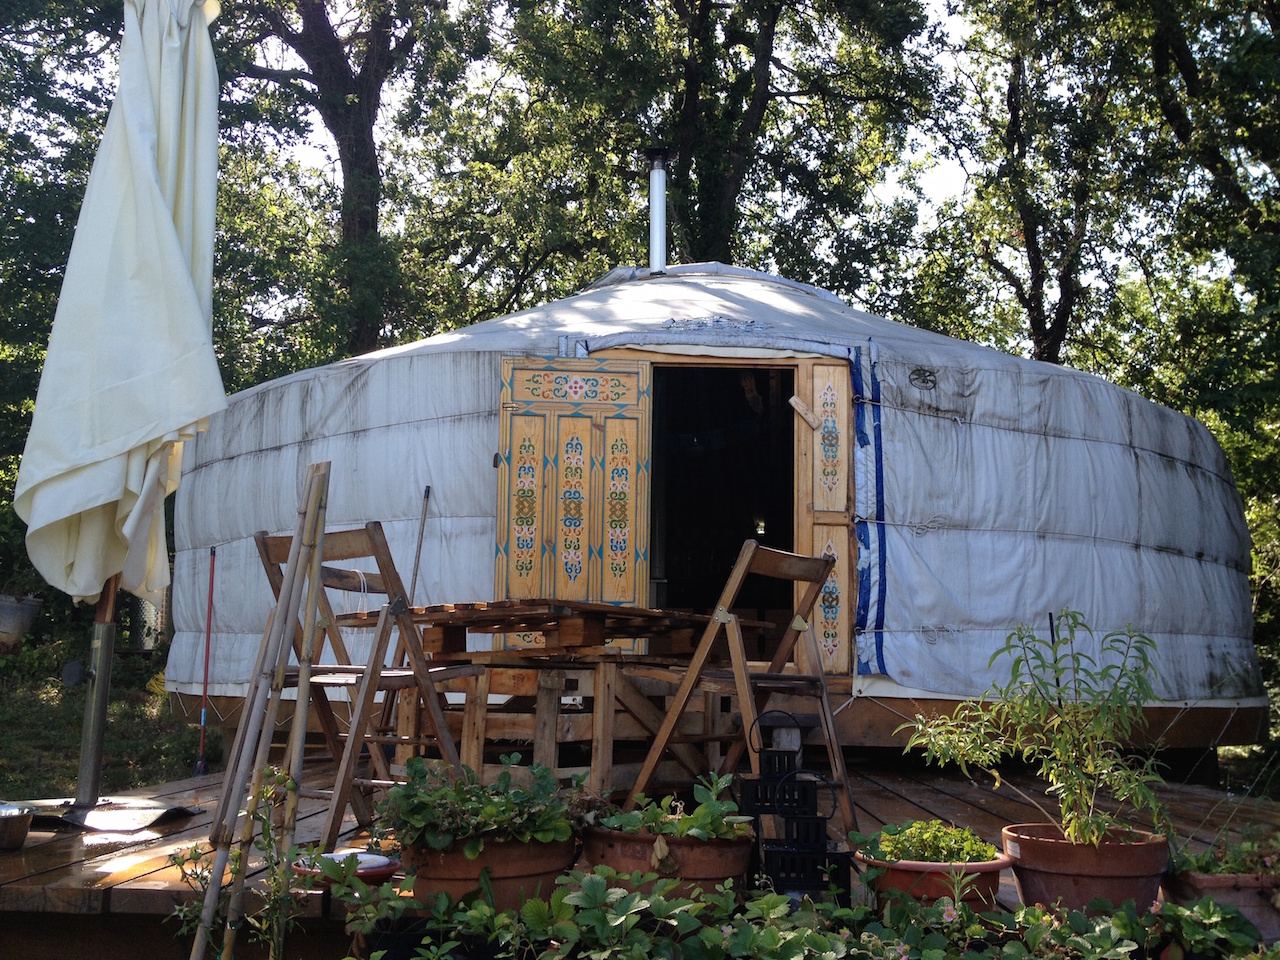 One of our field trips involved a yurt